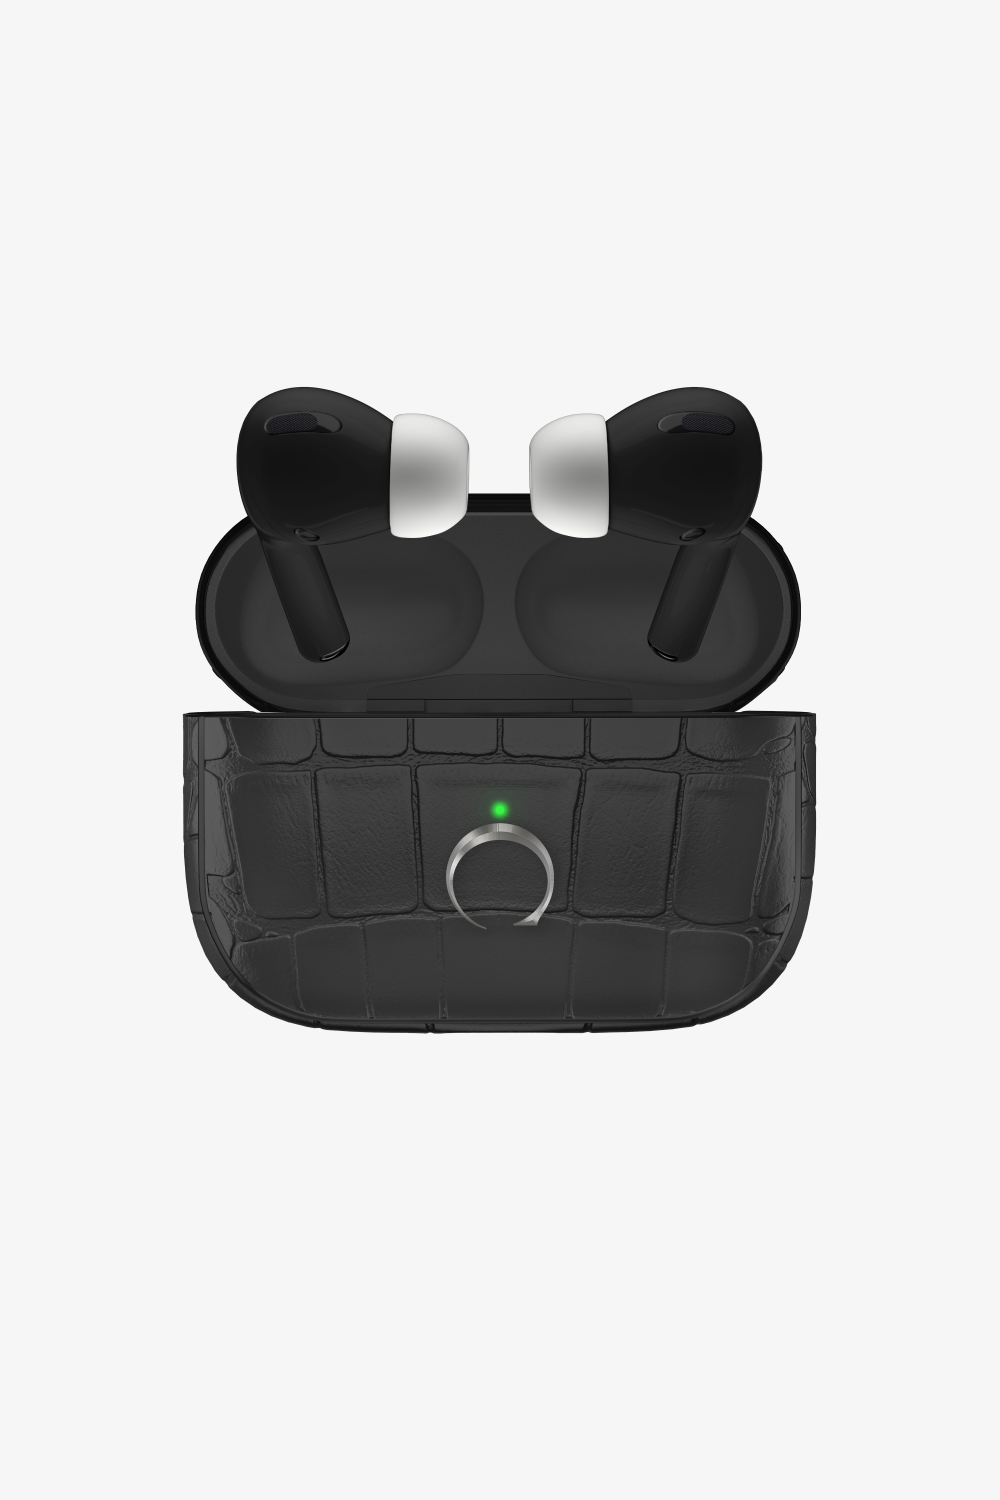 Alligator Airpods Pro 2nd Generation - Stainless Steel / Black - zollofrance